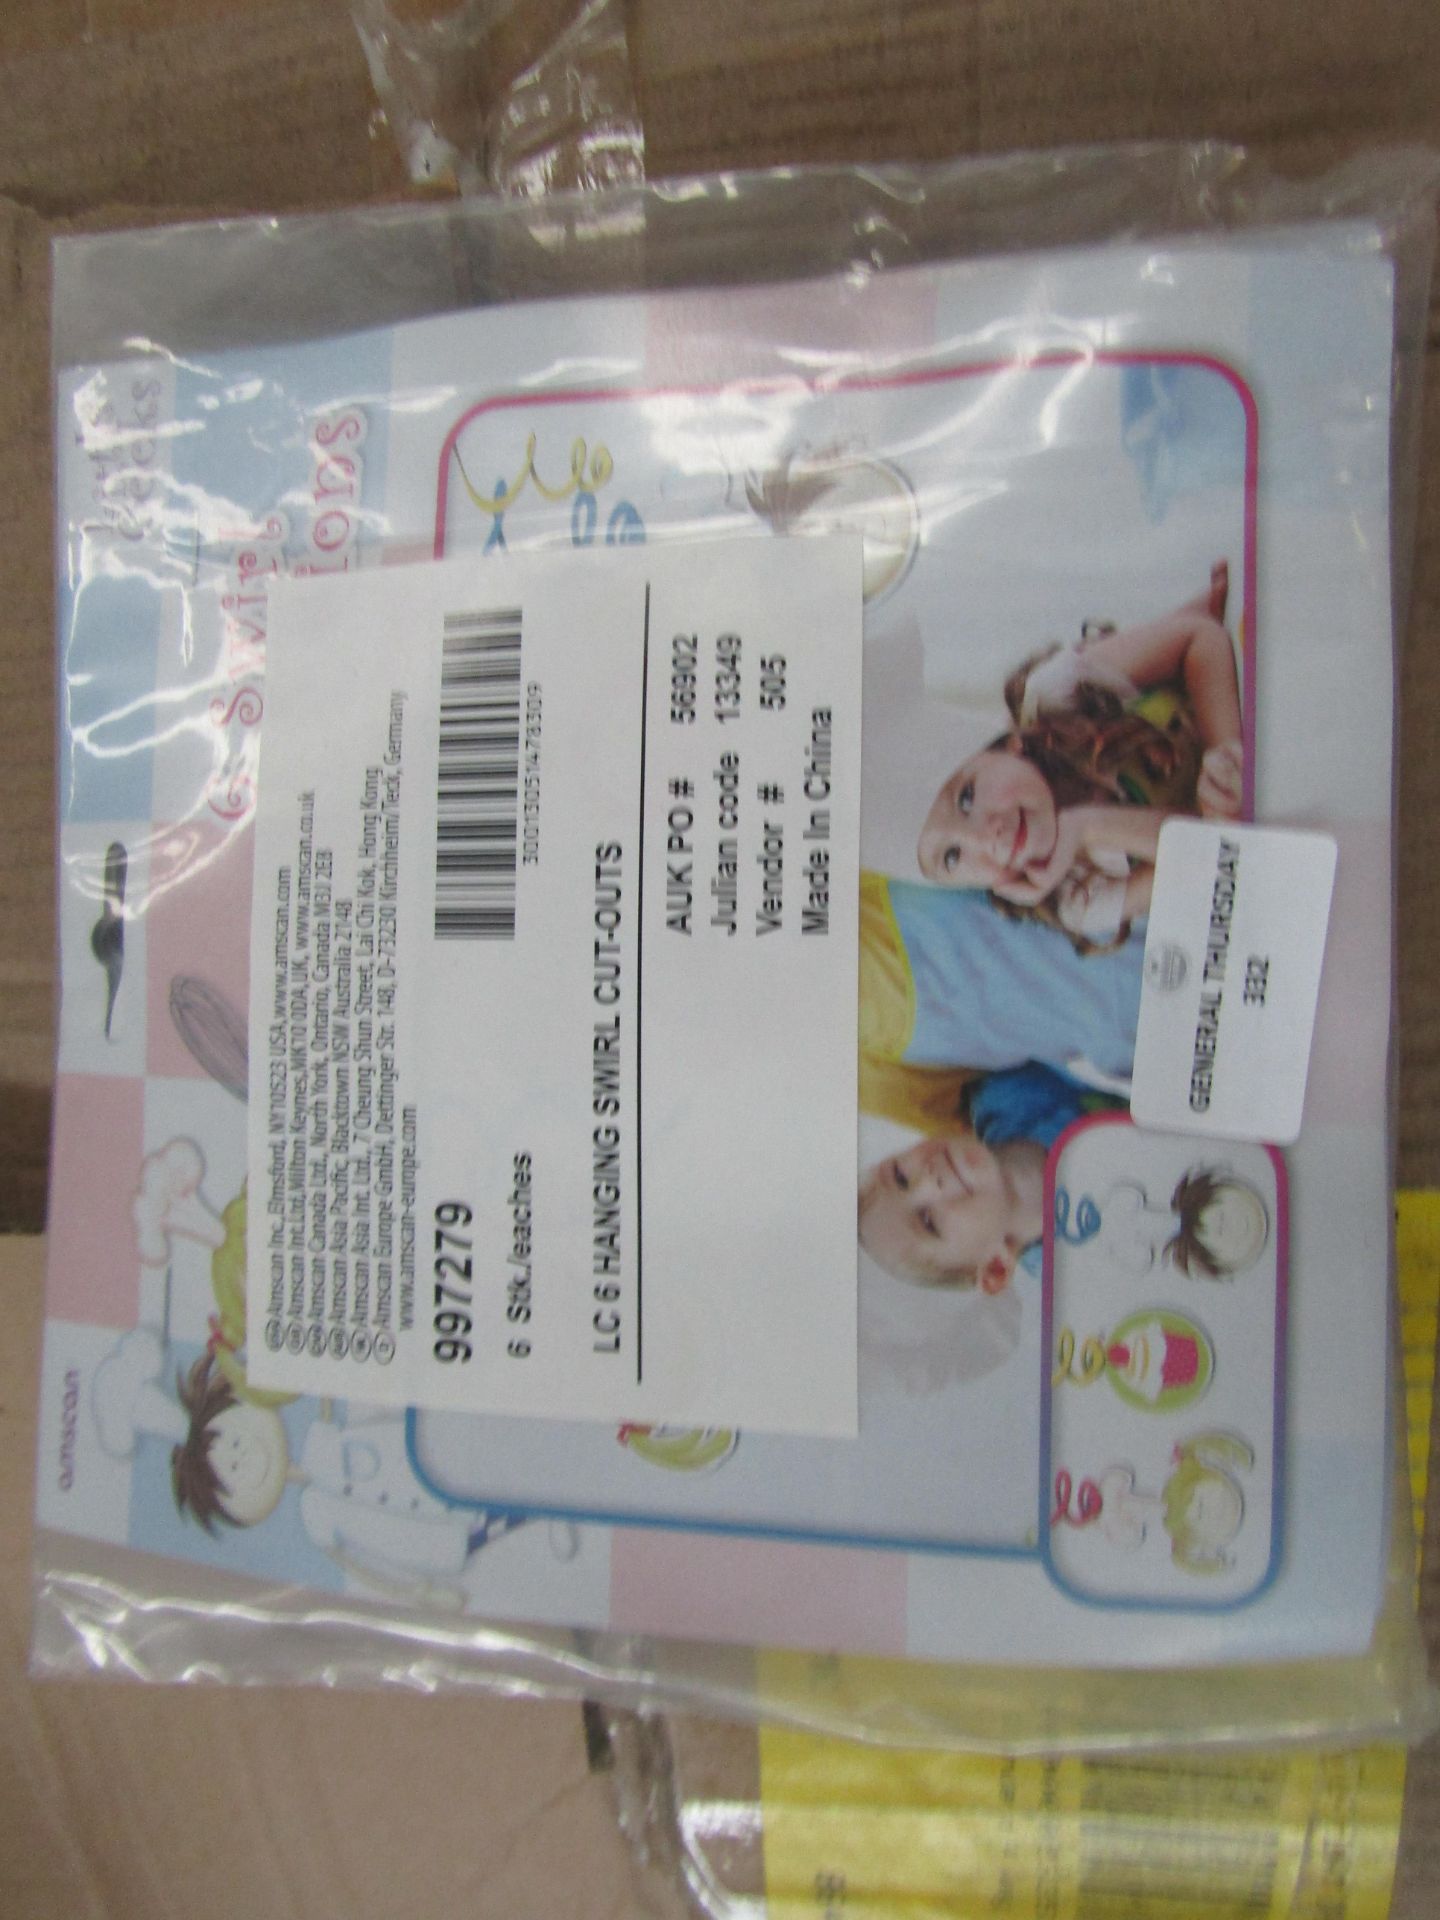 20 Packs of 6 Little Cooks Hanging Swirl Cut-Outs - All Unused & Packaged.